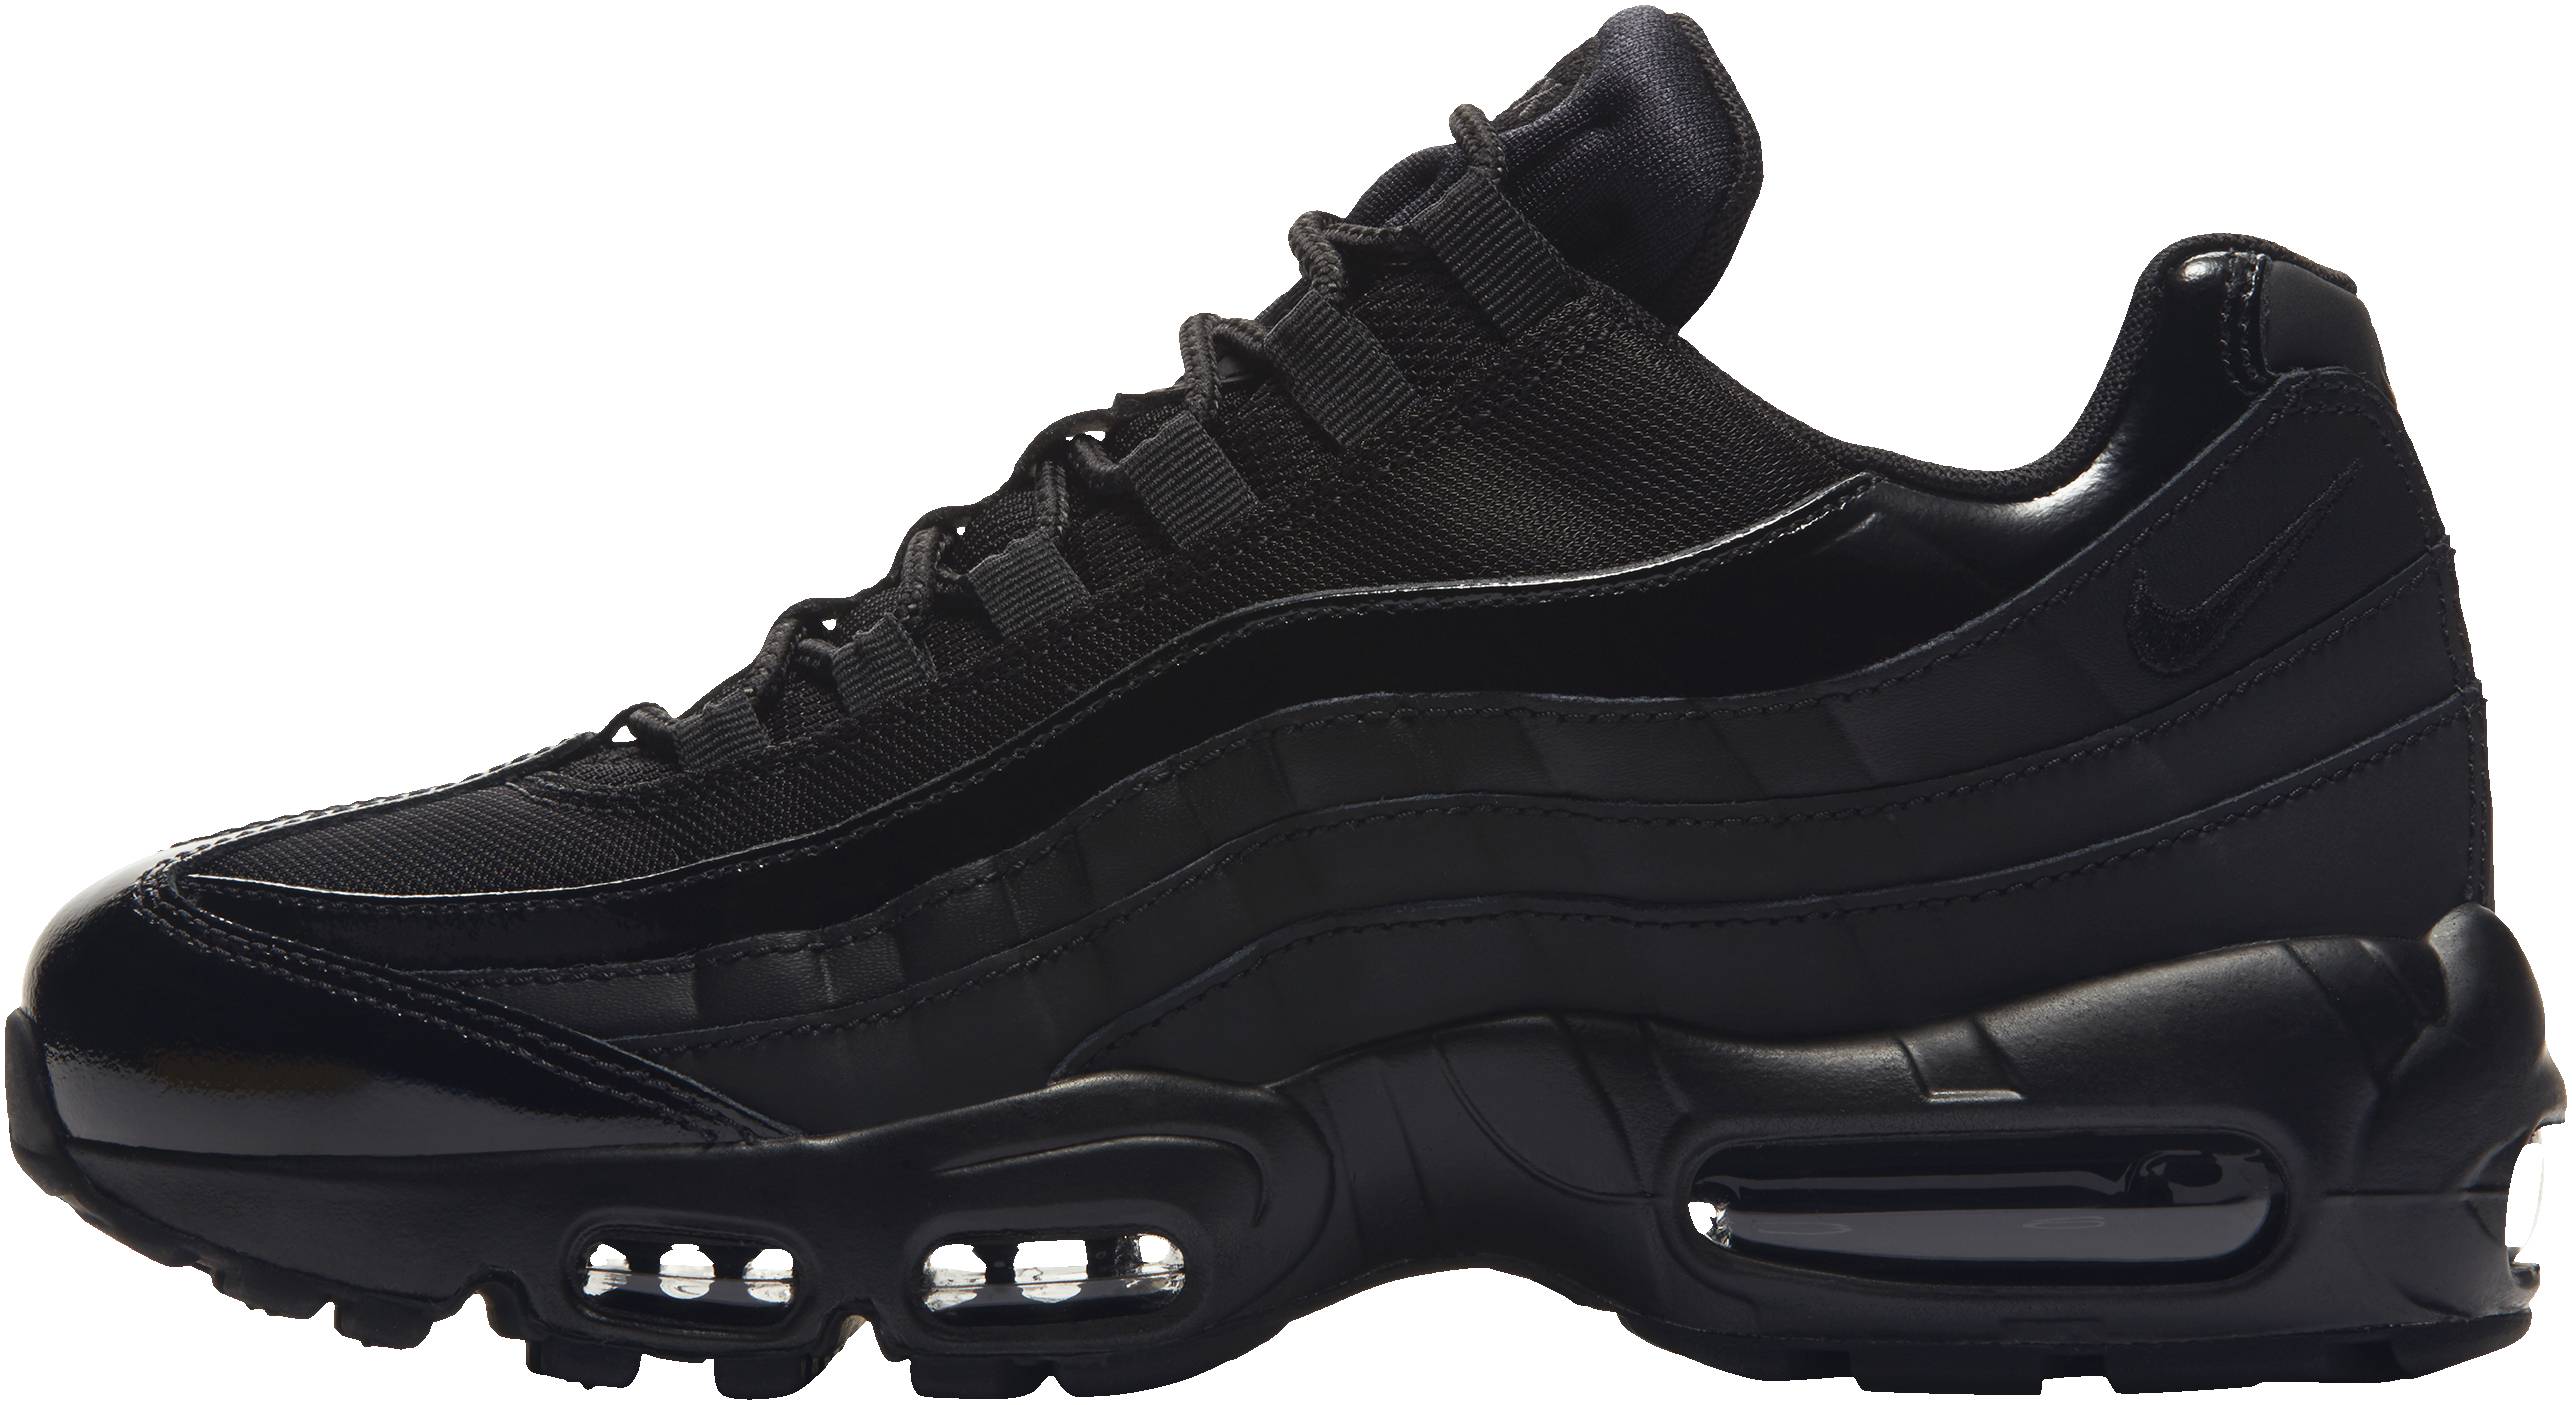 Only $140 + Review of Nike Air Max 95 